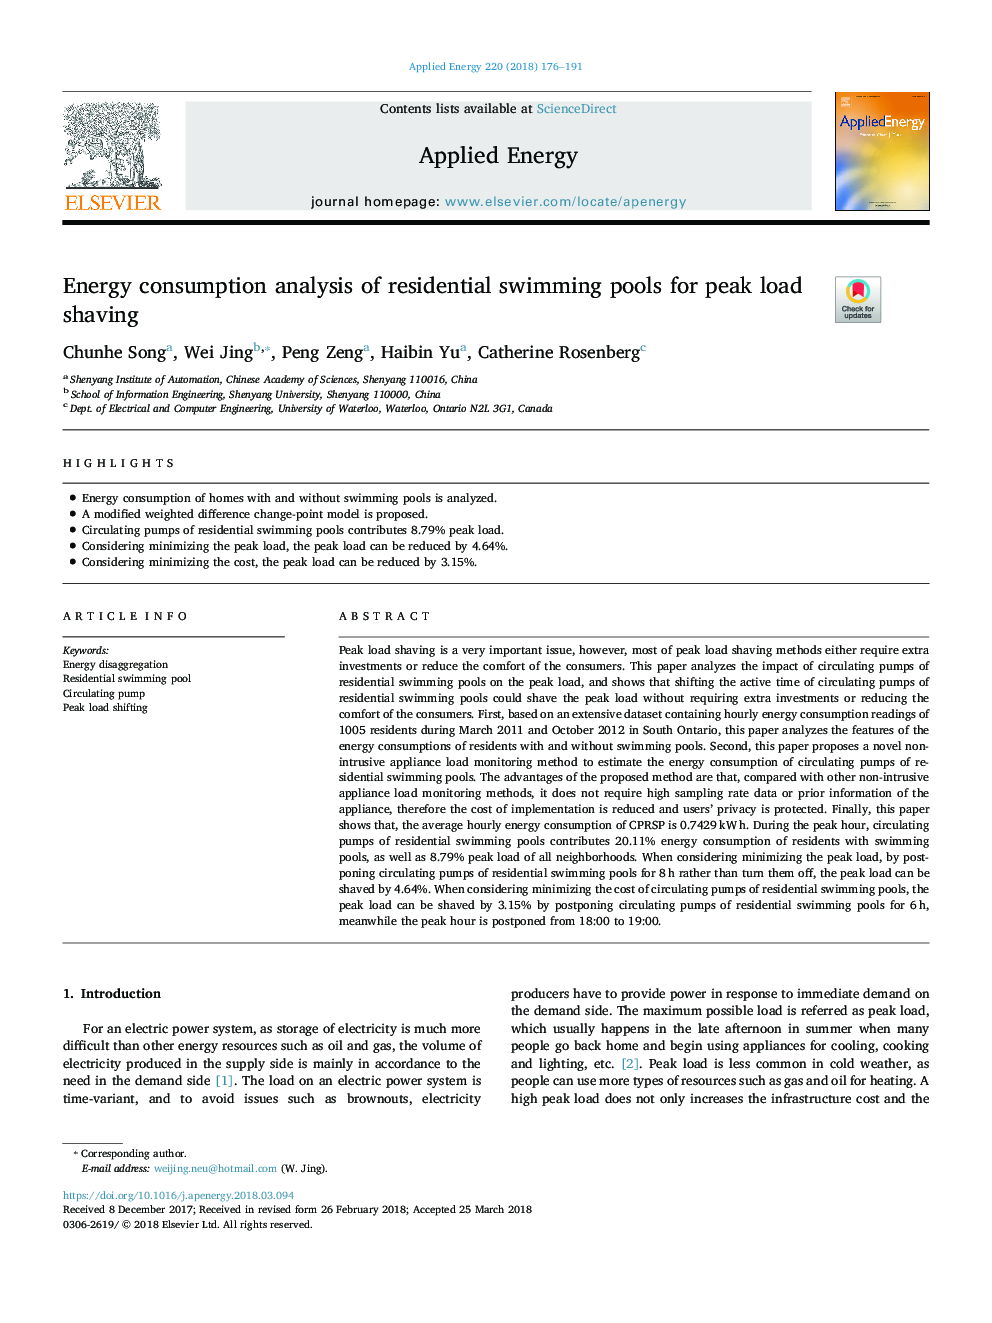 Energy consumption analysis of residential swimming pools for peak load shaving